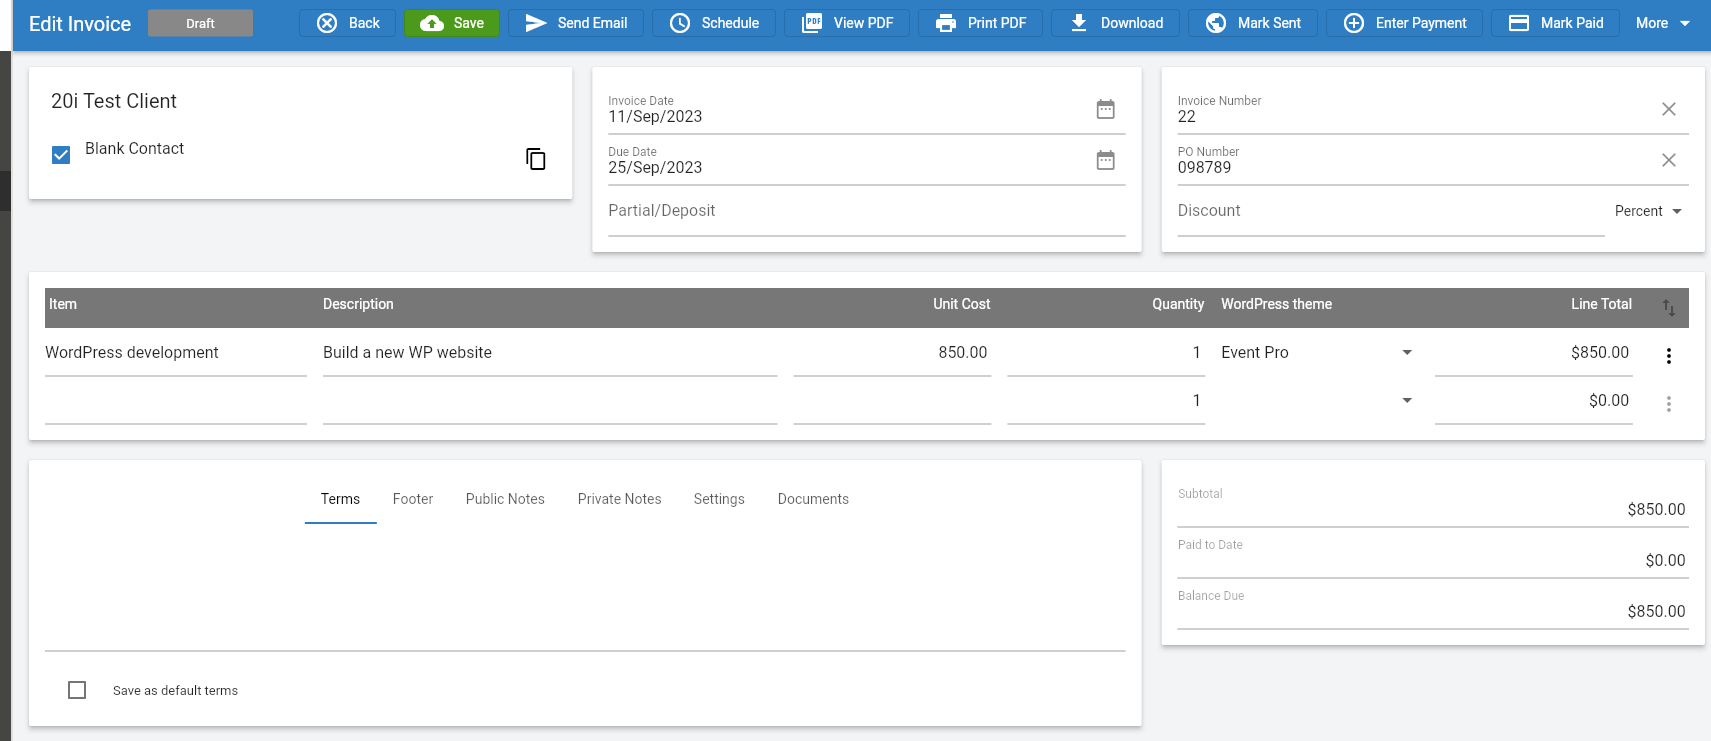 Add a product to an invoice within Invoice Ninja